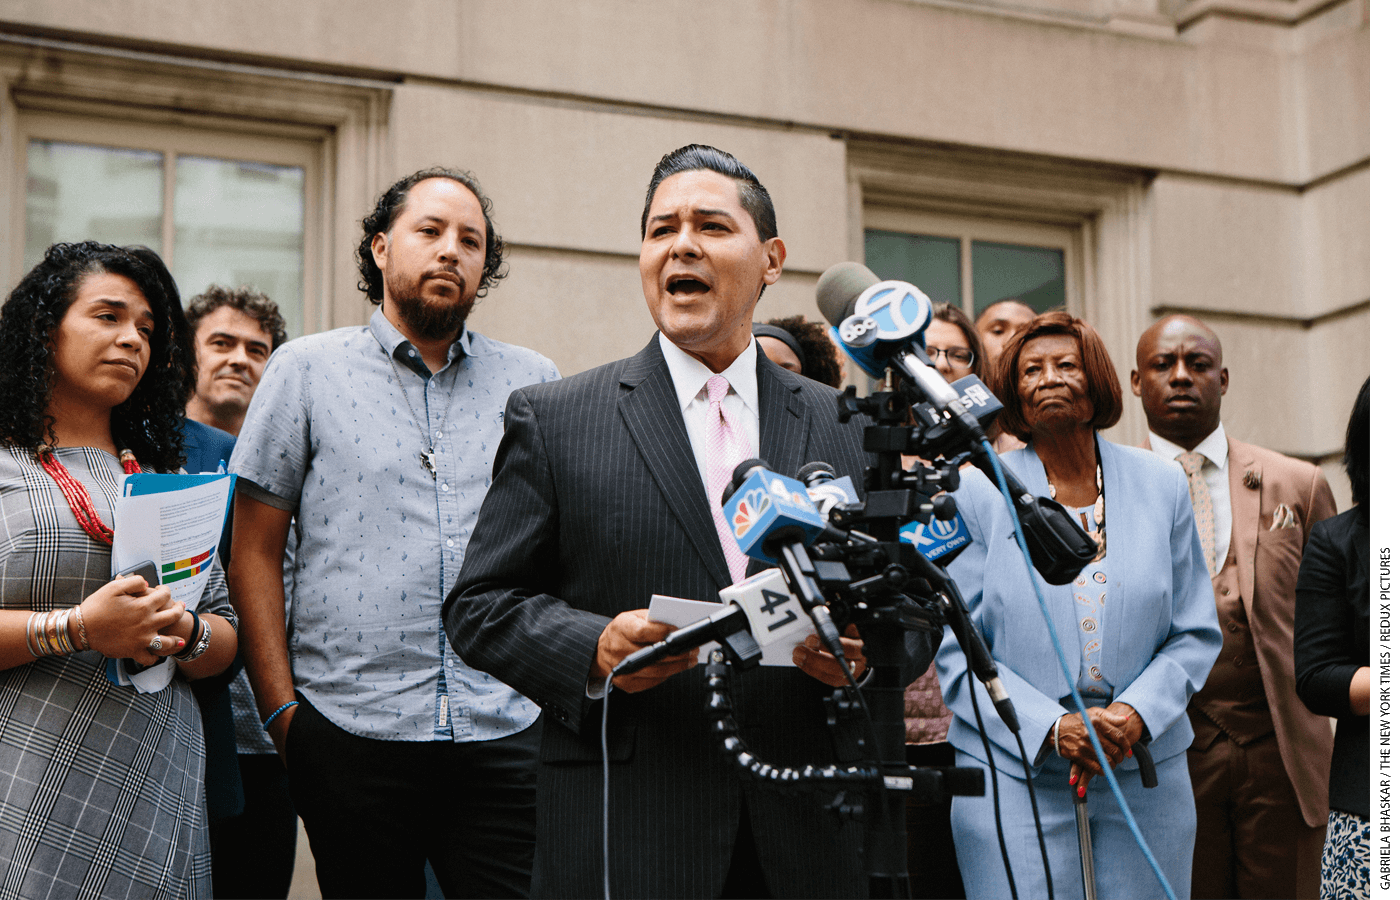 Richard Carranza, schools chancellor for New York, speaks during a news conference in front of the city’s Department of Education.